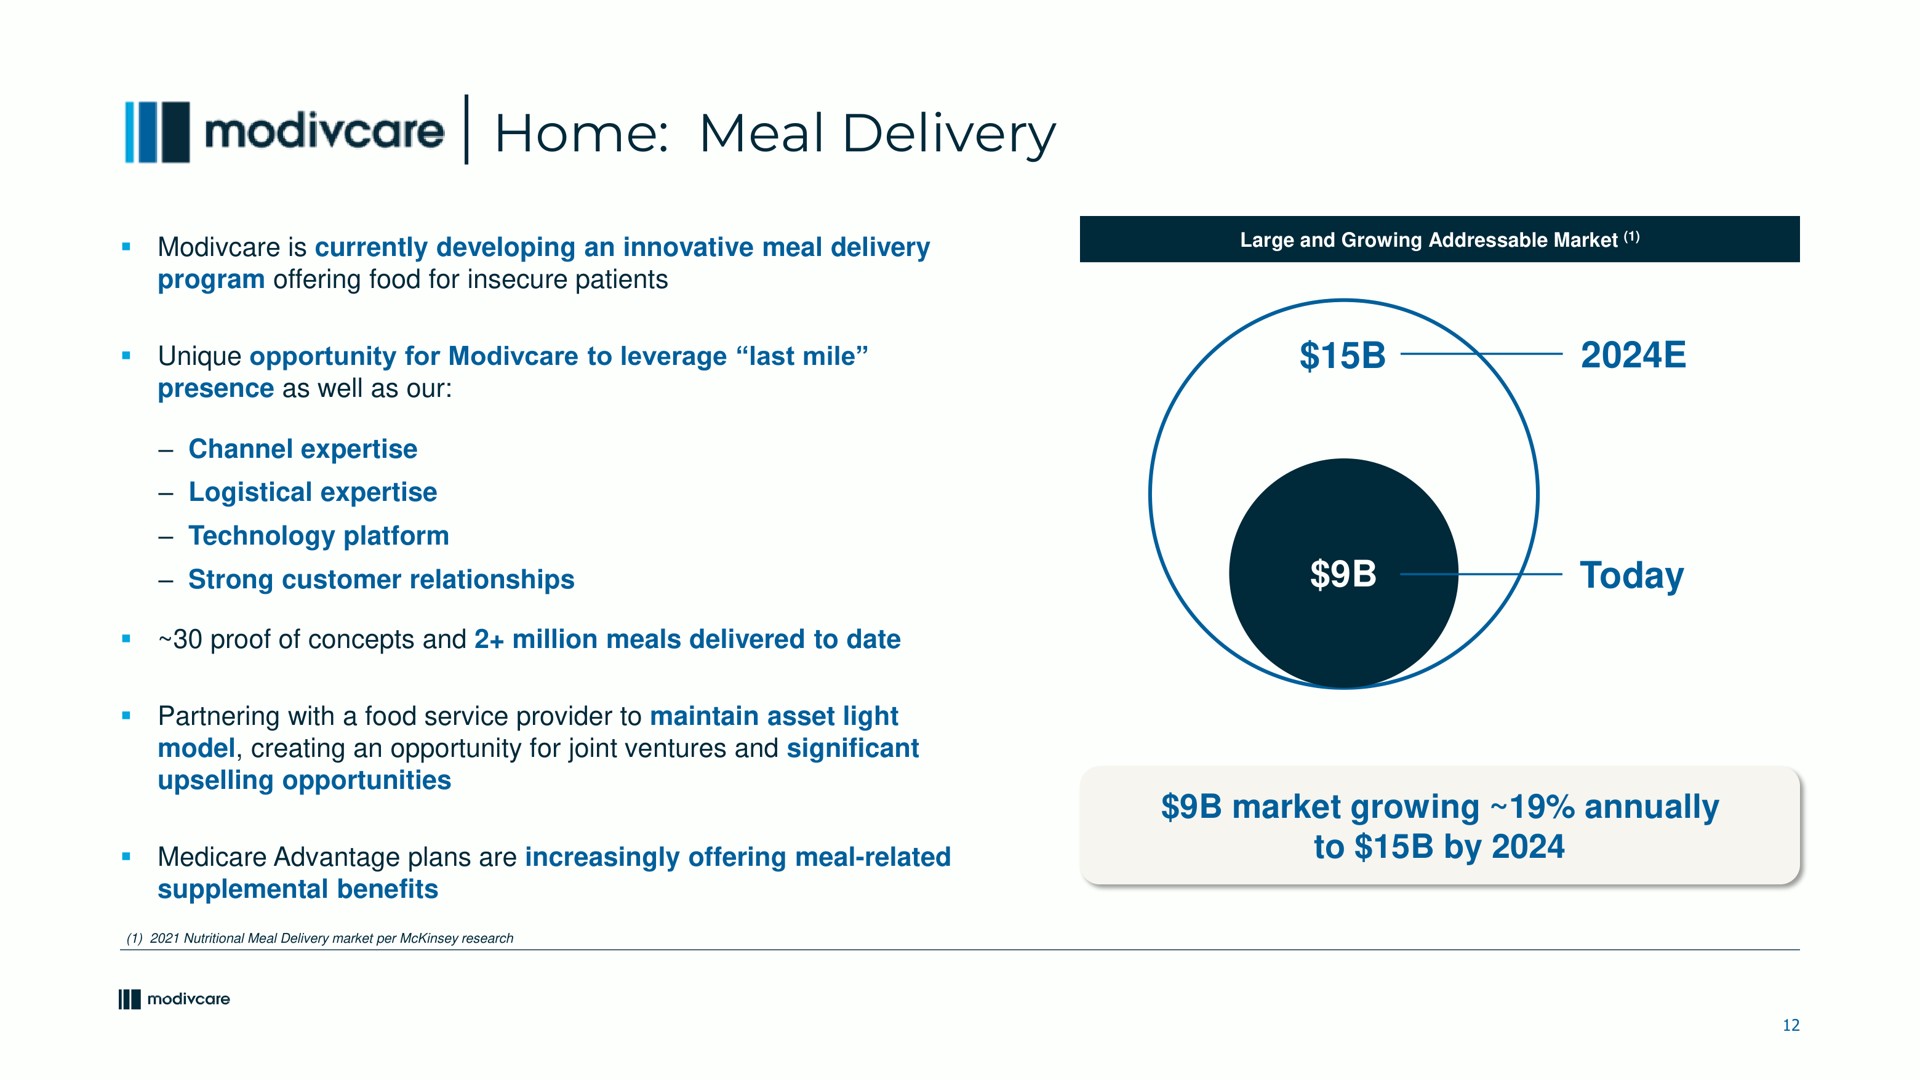 home meal delivery today market growing annually to by | ModivCare